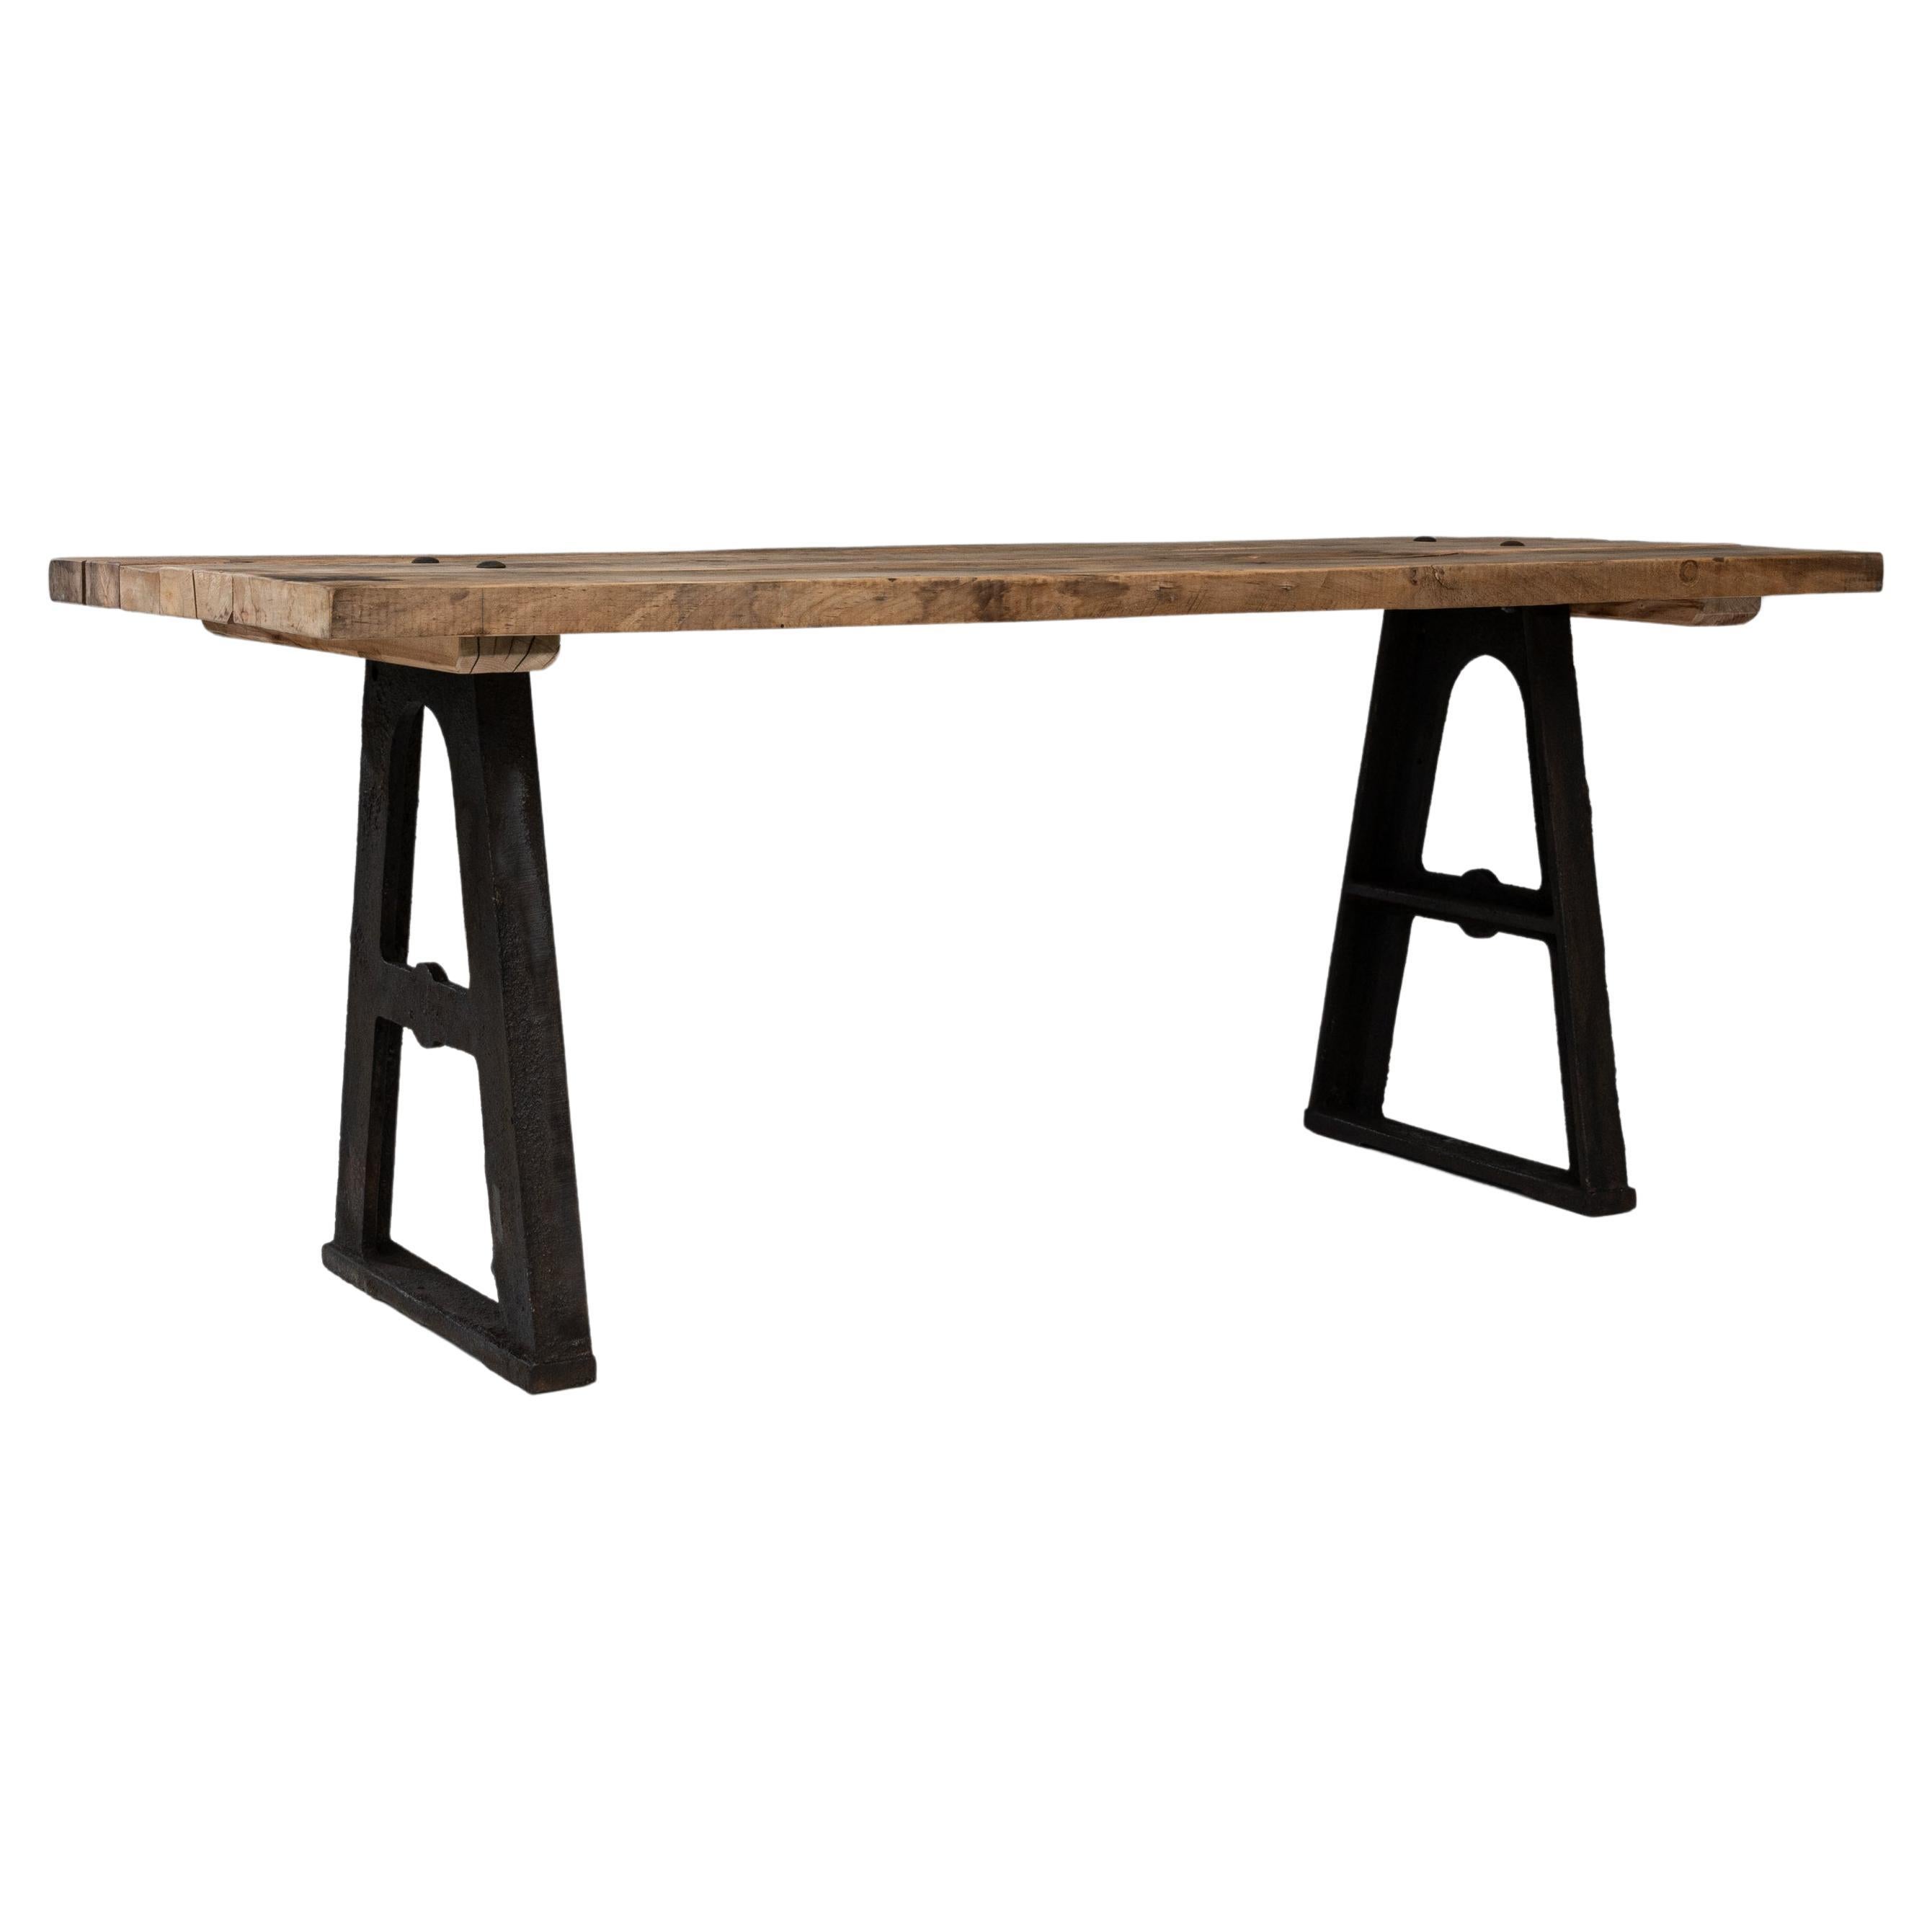 Early 20th Century French Industrial Table